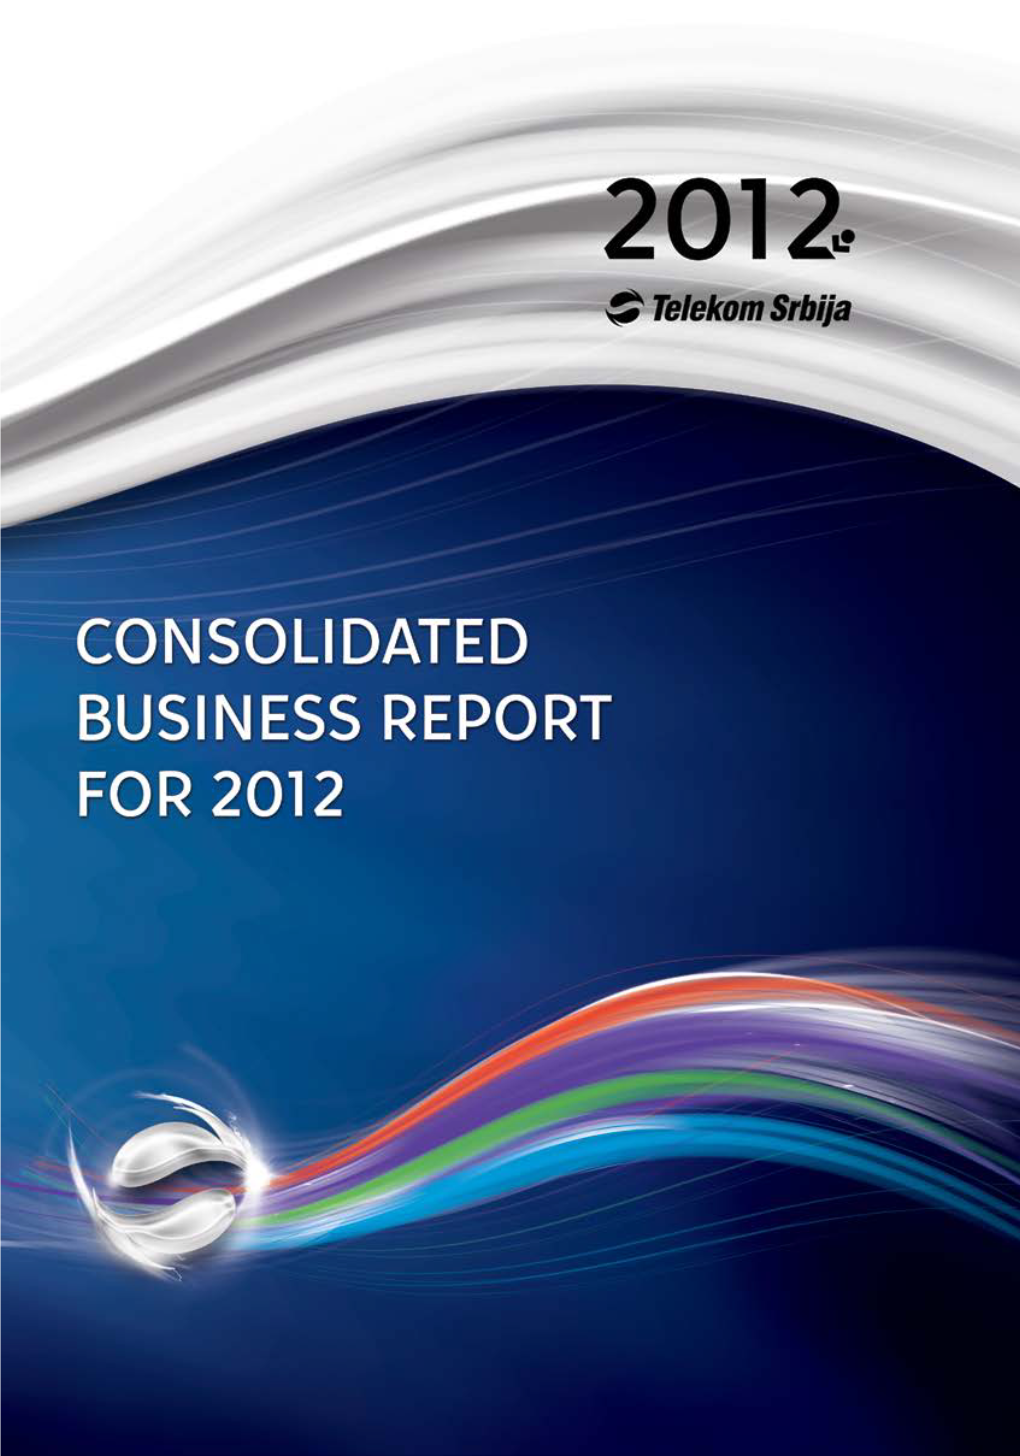 Consolidated Annual Business Report 2012 Telekom